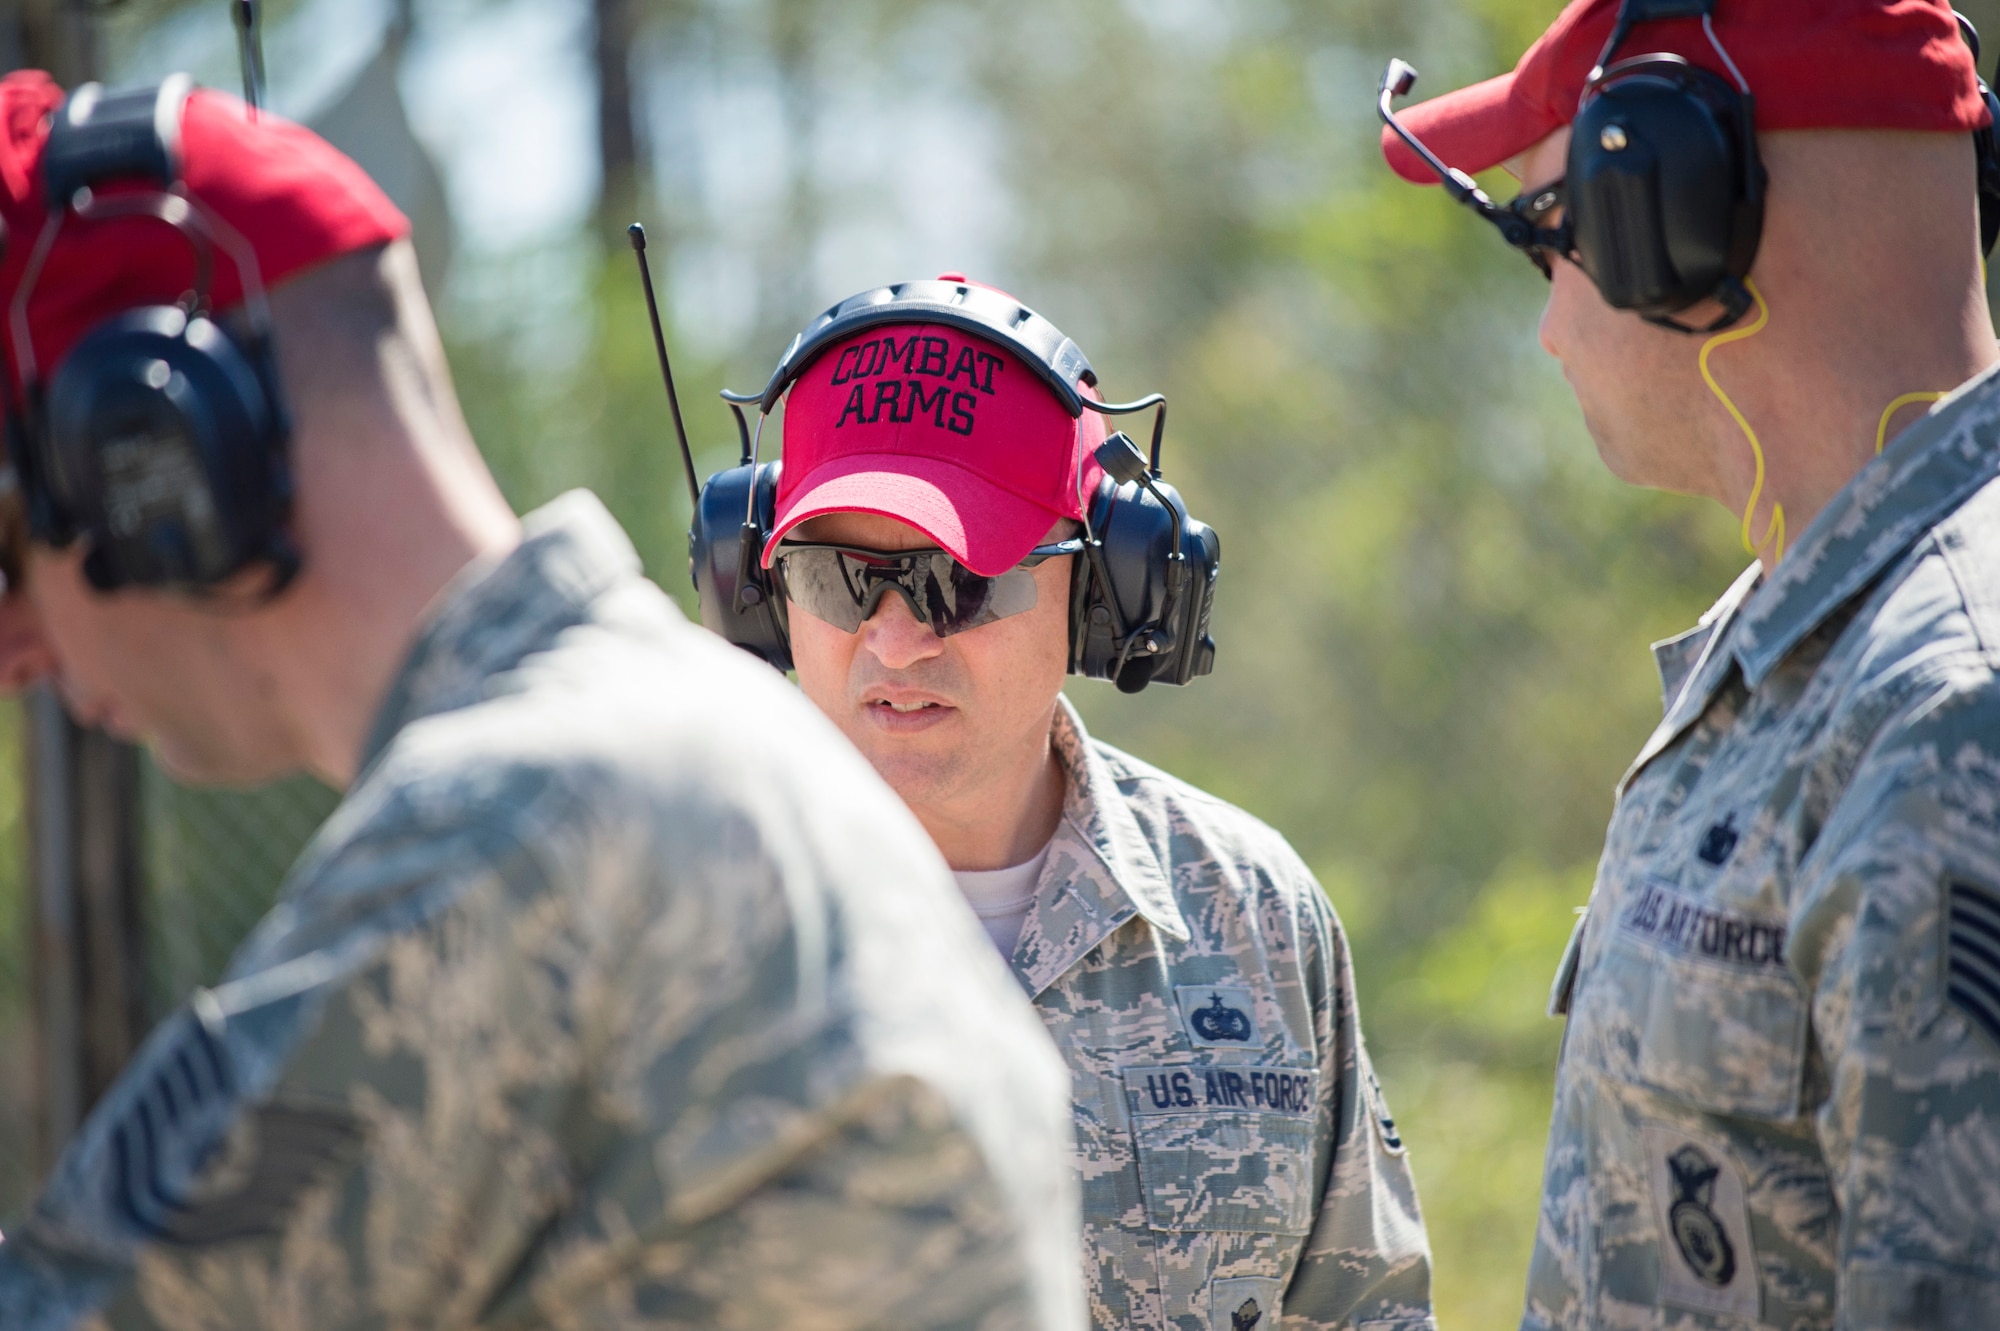 Tech. Sgt. Chris Wessel (center), a combat arms instructor for the 512th Security Forces Squadron, performs a safety evaluation with the other instructors on the firing range, April 2, 2016, at Naval Air Station Pensacola, Fla., as part of an aircrew deployment recurrency training event. Instructors from active-duty and Air Force Reserve and the Navy helped provided a seamless, multi-service cadre for the trainees March 29 to April 3, during the training event. (U.S. Air Force photo/Capt. Bernie Kale)